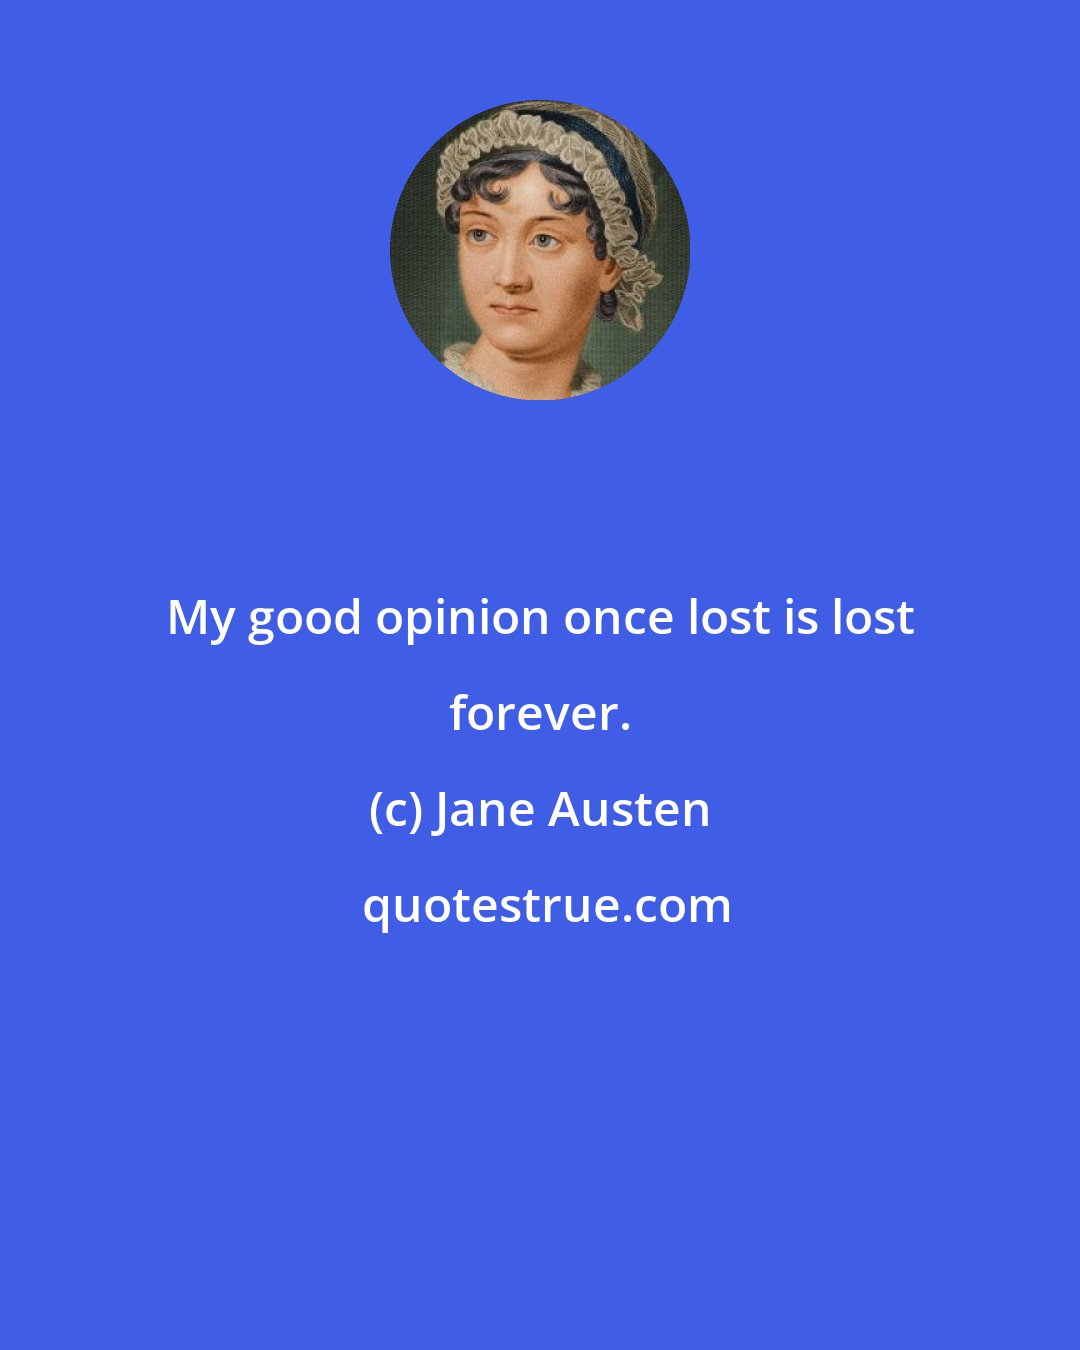 Jane Austen: My good opinion once lost is lost forever.